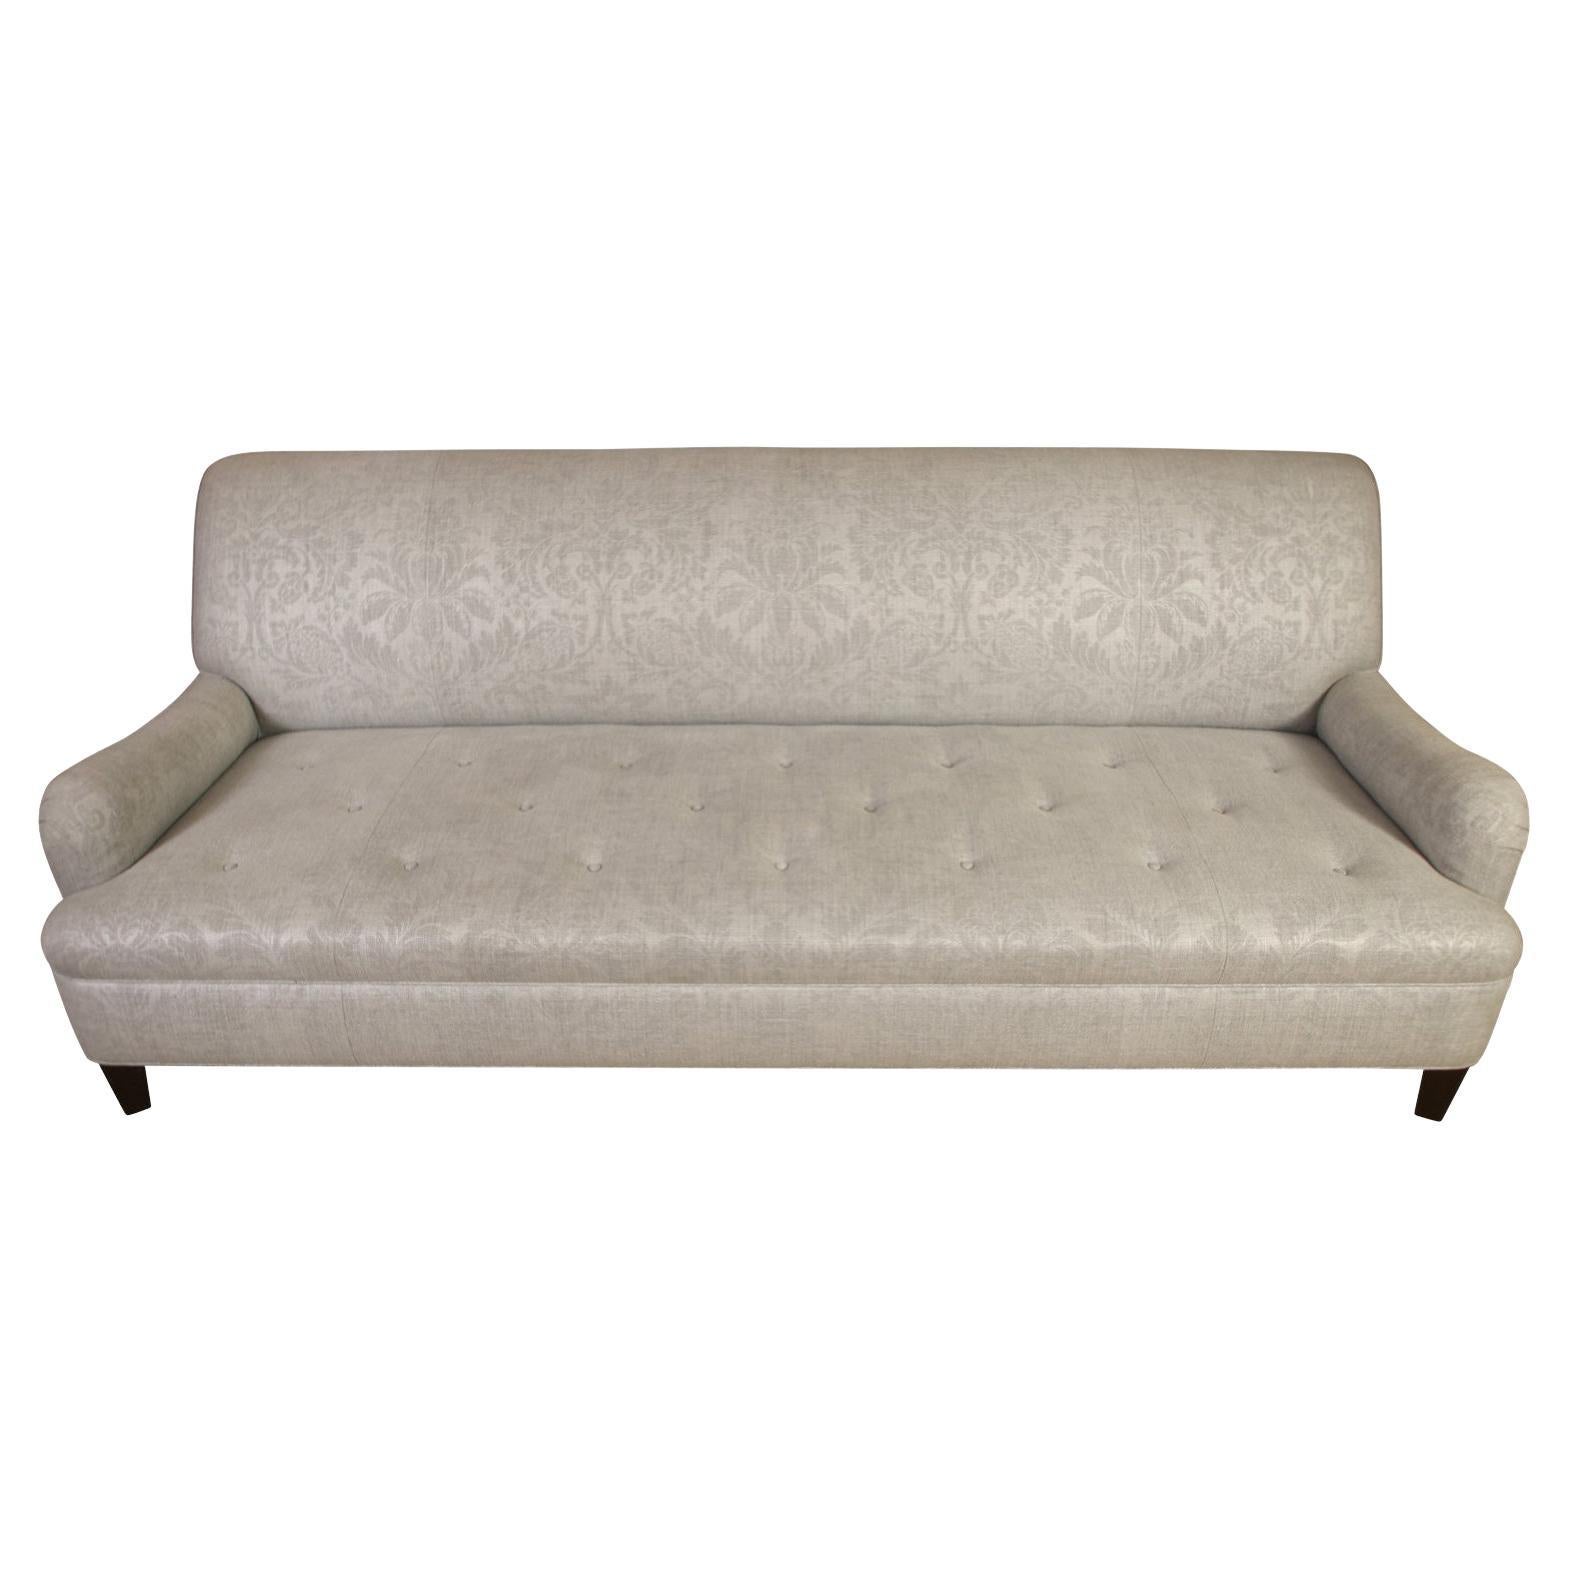 Silver Jacquard Sofa With Tufted Seat